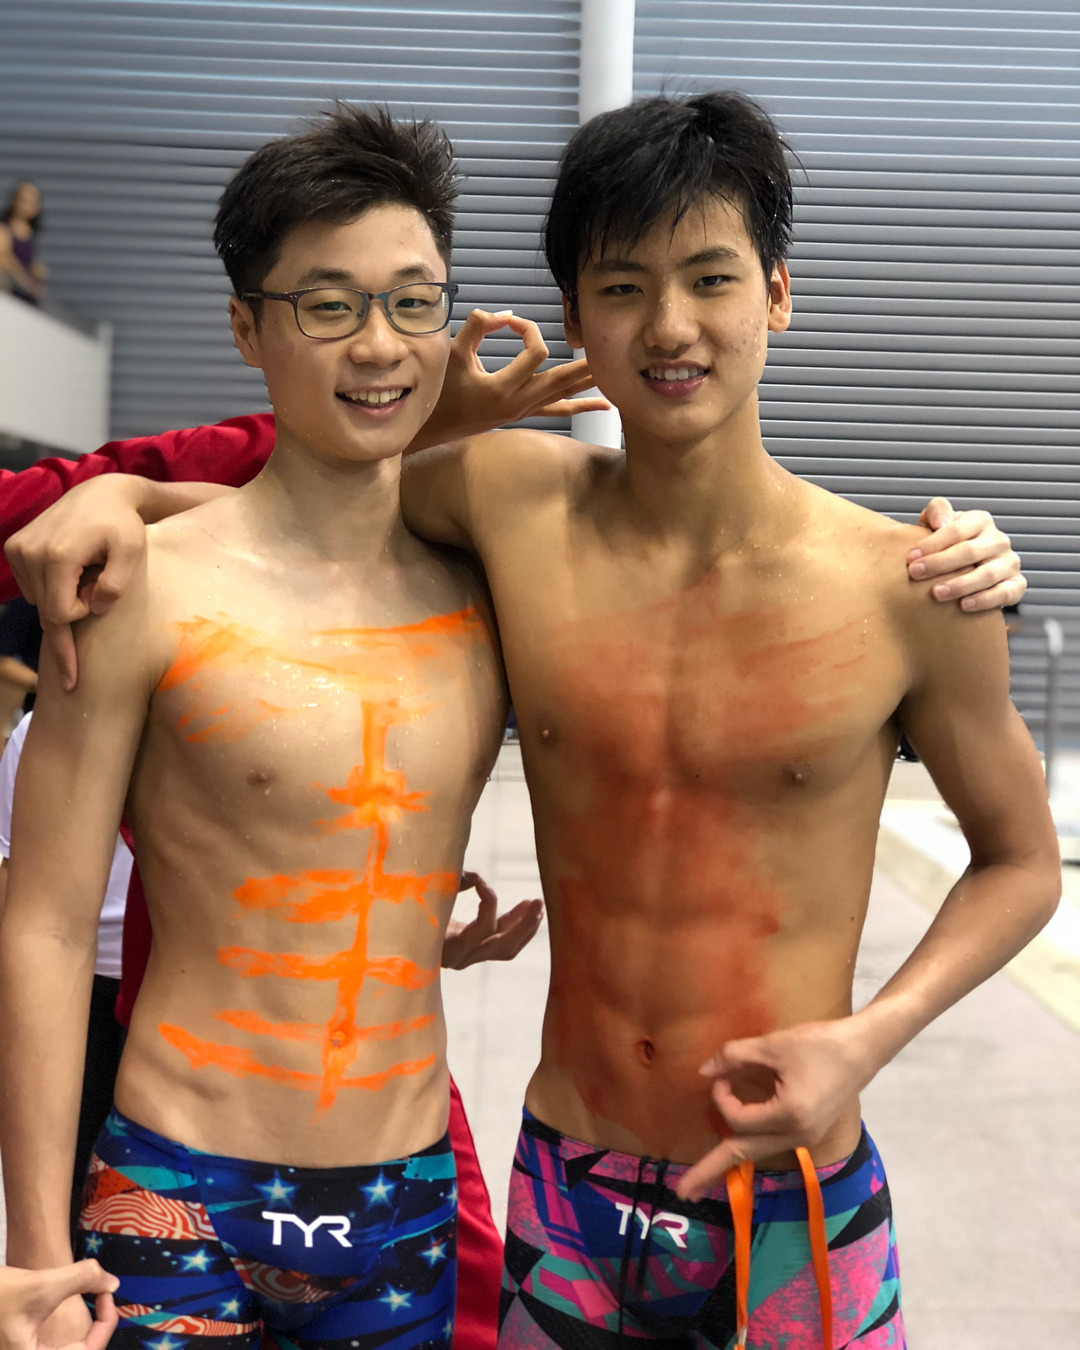 sjiguy: Owen Teo seems to have taken a liking to Ritchie Oh’s nipple.